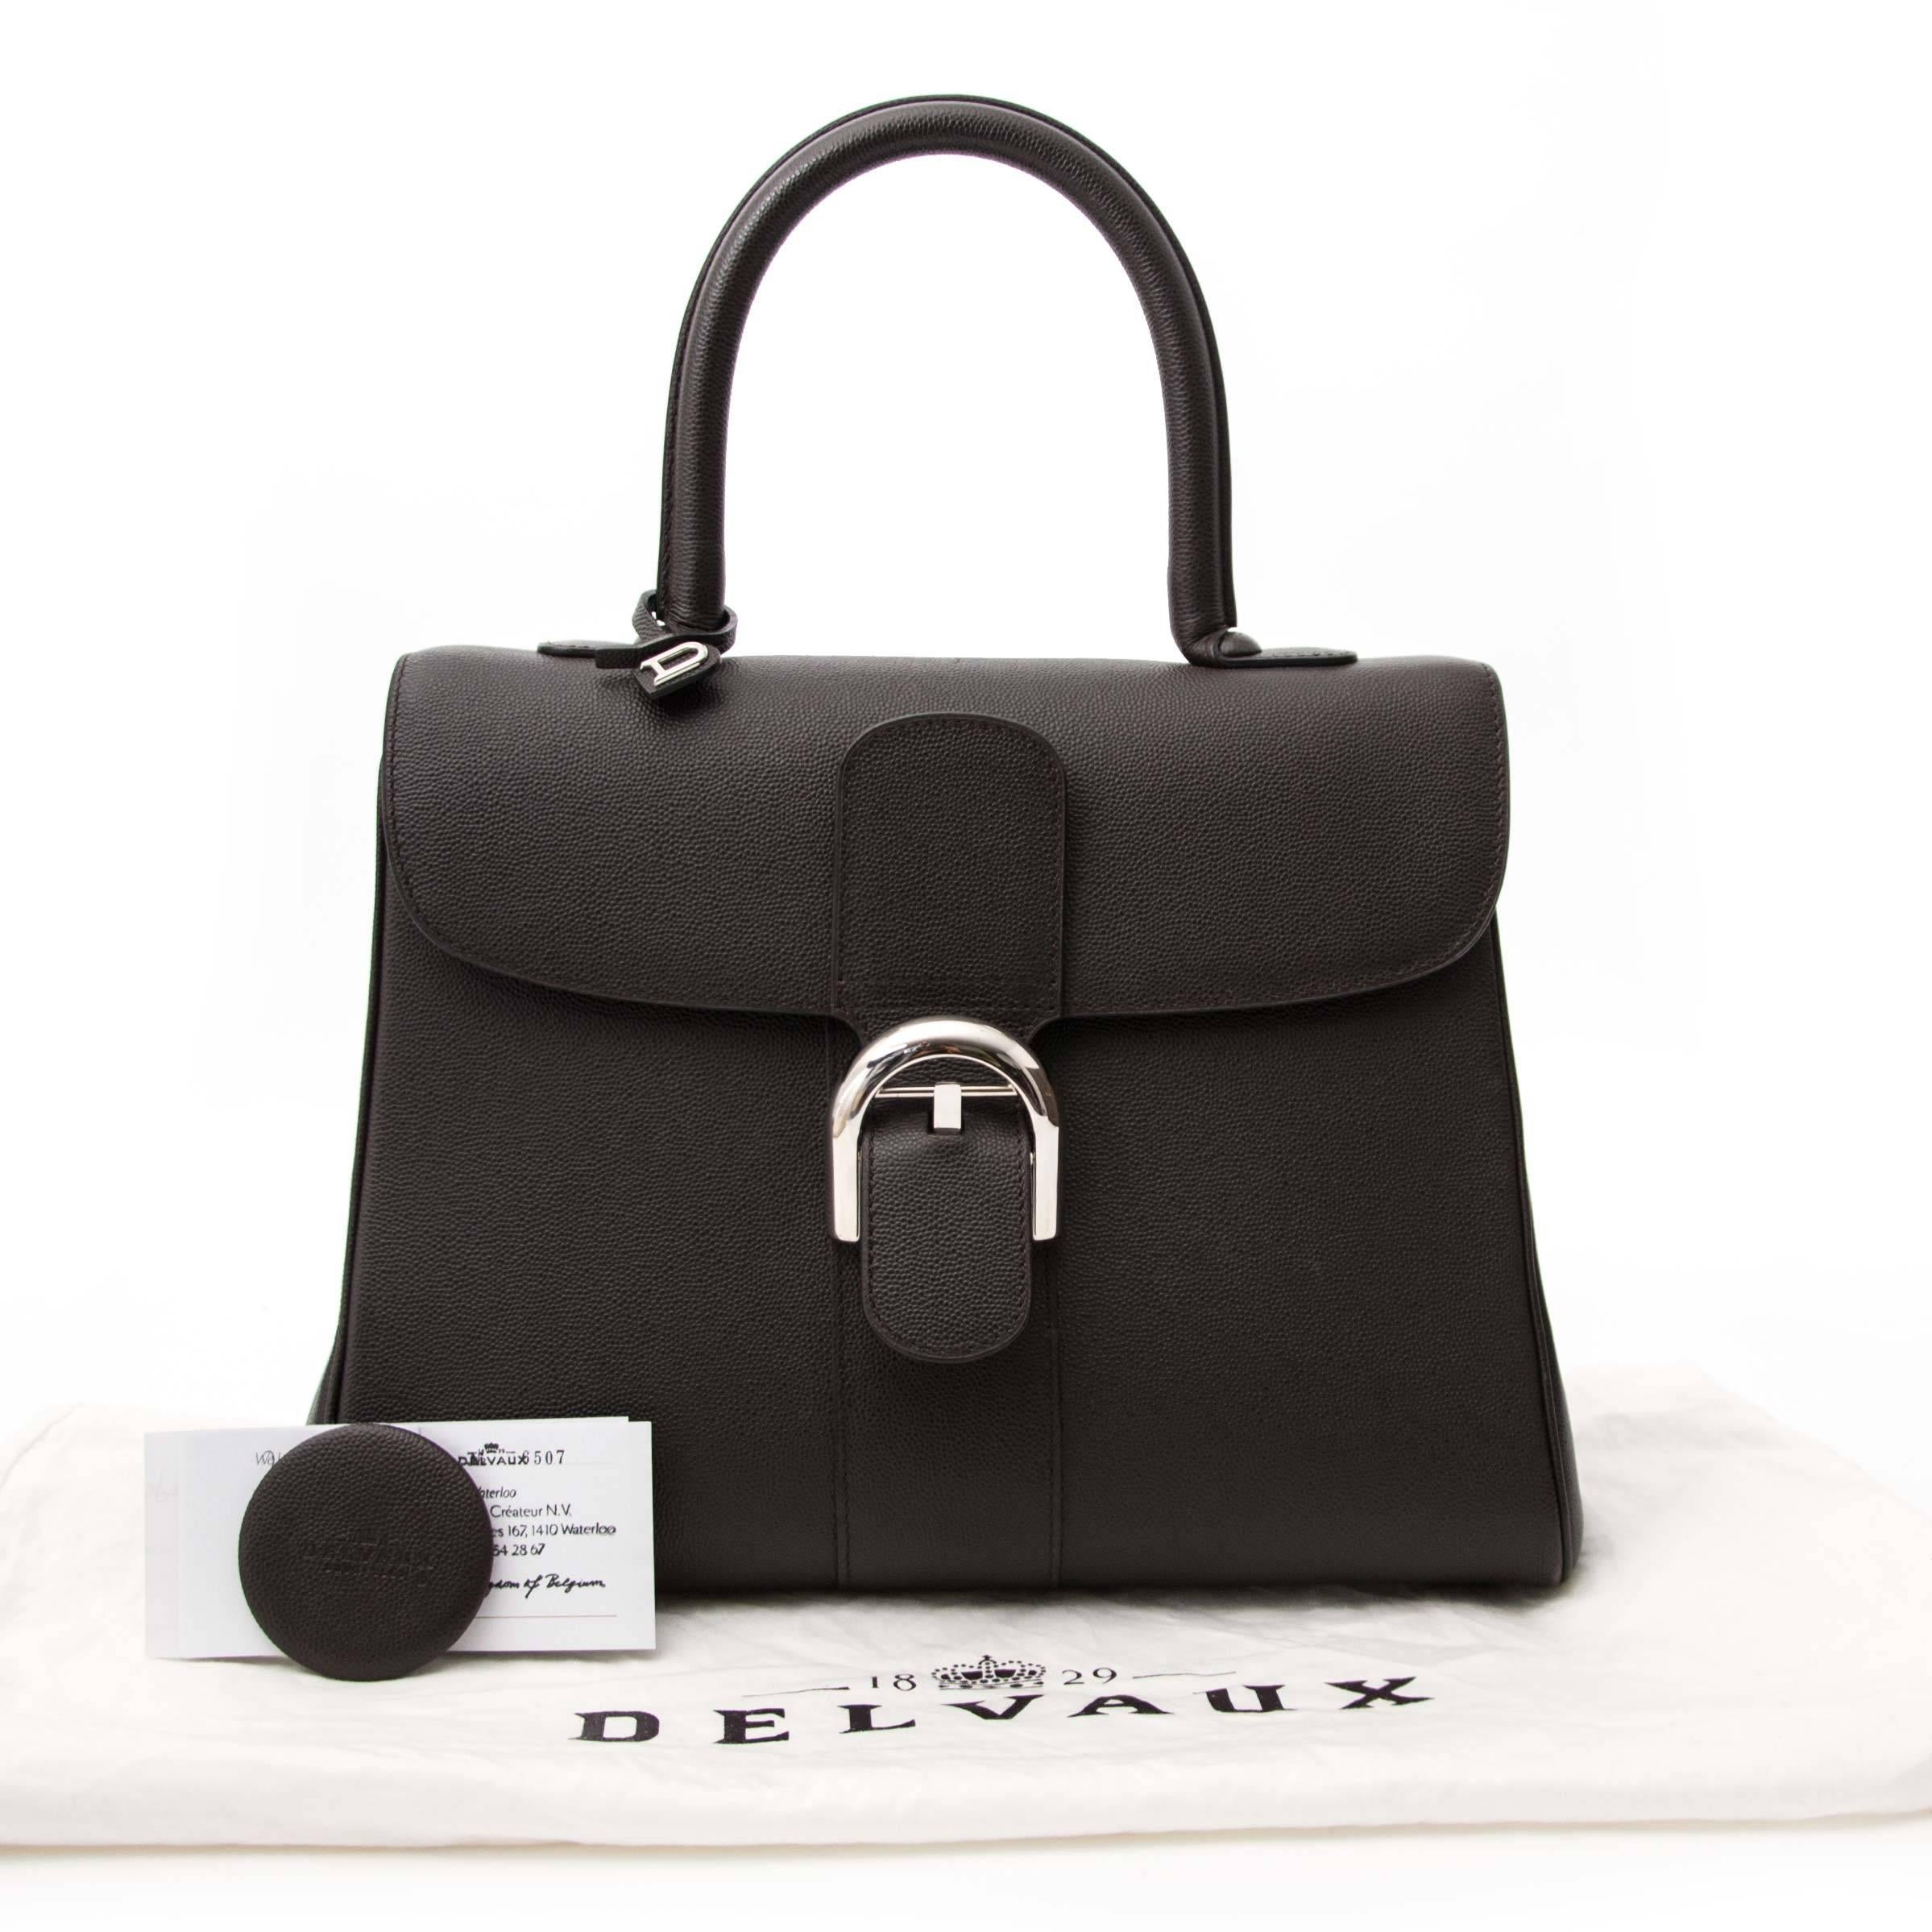 

Delvaux Cafe Veau Diamond Brillant 

The iconic Delvaux Brillant MM + strap was designed in 1958 and is still very much on trend today.
This Delvaux Brillant comes in a medium size and is crafted out of grained diamond leather.
The silver toned